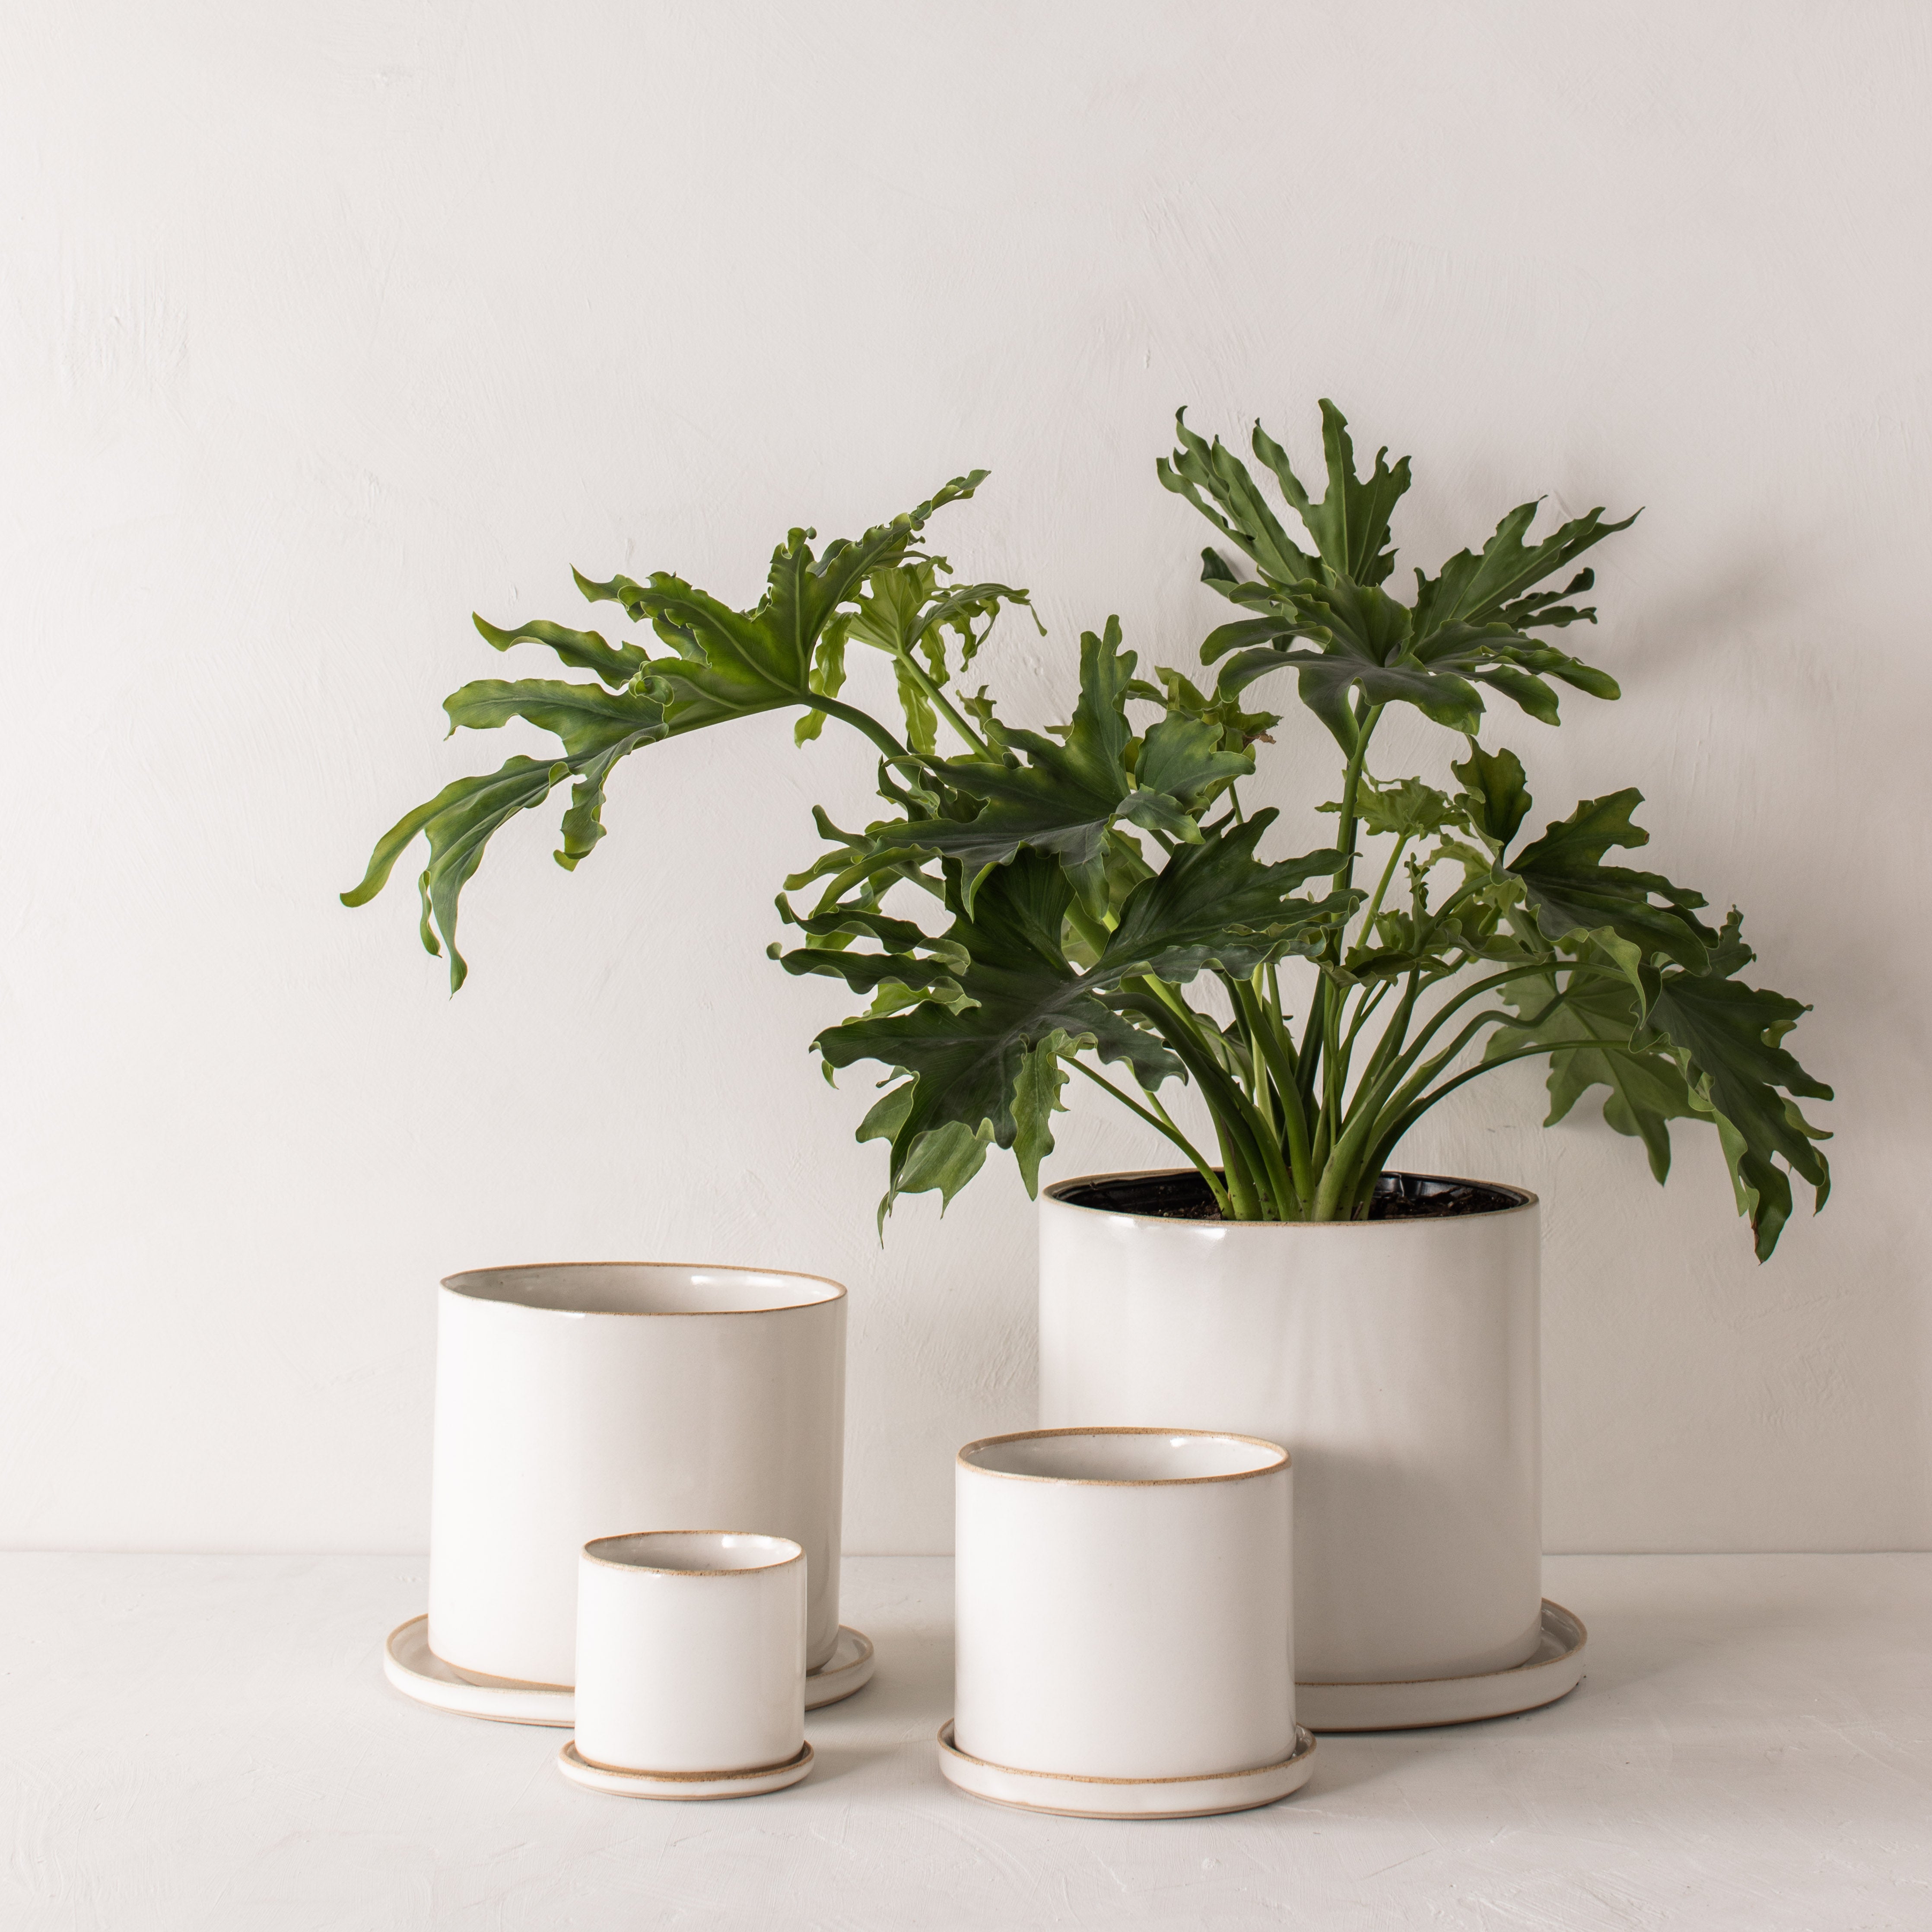 Four white ceramic planters with bottom drainage dishes, 4, 6, 8, and 10 inches. Staged on a white plaster textured tabletop against a plaster textured white wall. Large tall solum plant inside the 10 inch. Designed and sold by Convivial Production, Kansas City Ceramics.